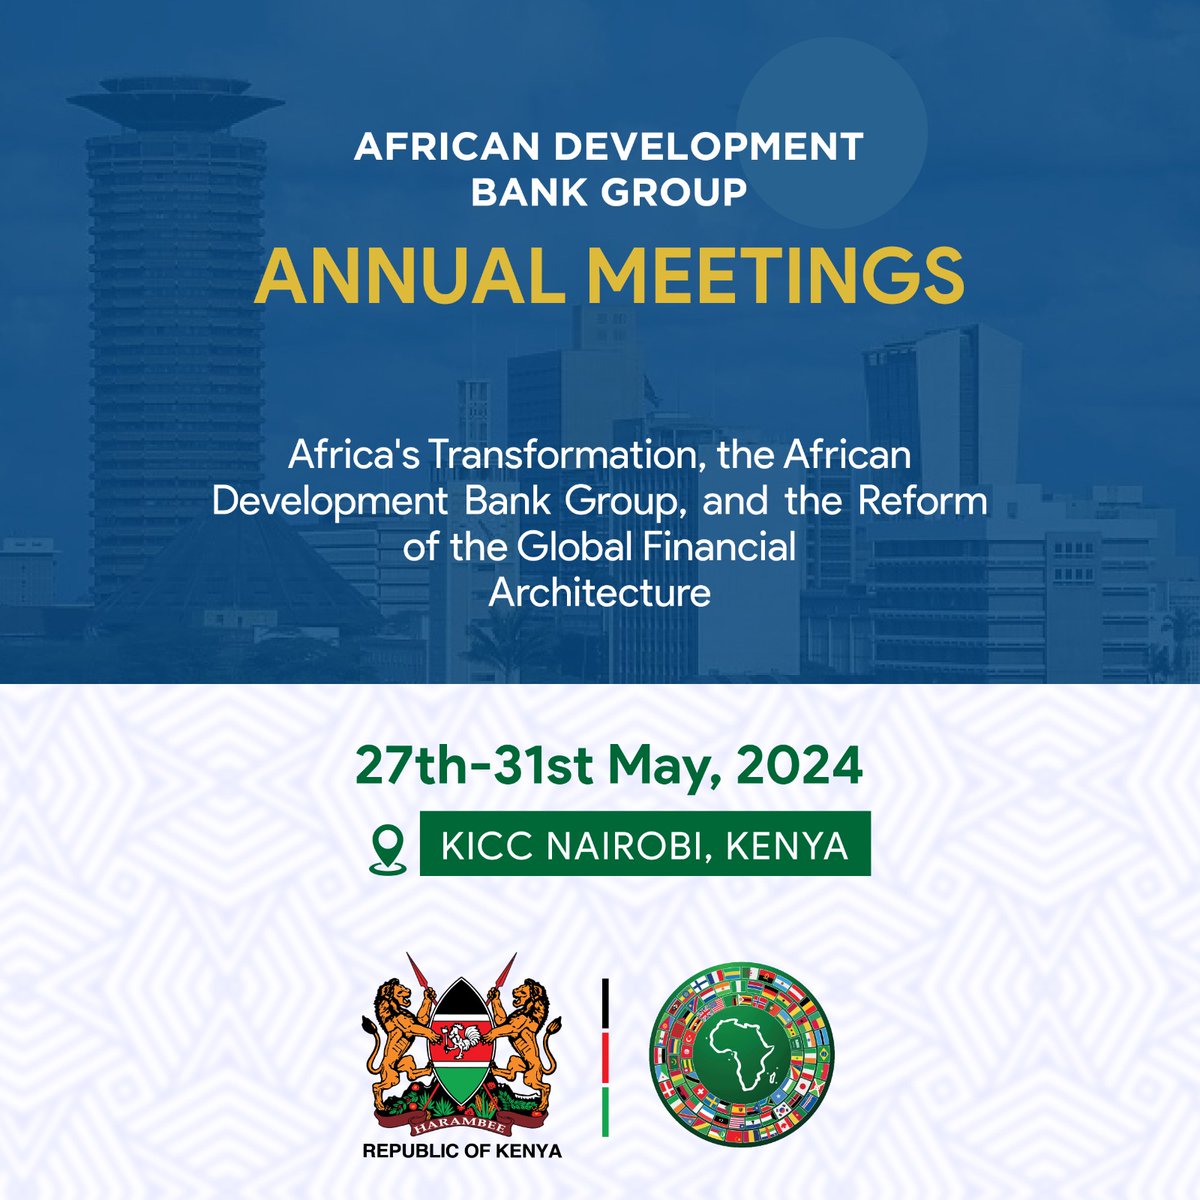 Join us for the African Development Bank Group Annual Meetings in Nairobi, Kenya, from May 27th to 31st, 2024. This year's theme is 'Africa's Transformation, the African Development Bank Group, and the Reform of the Global Financial Architecture.' ^PMN #KBCEnglishService